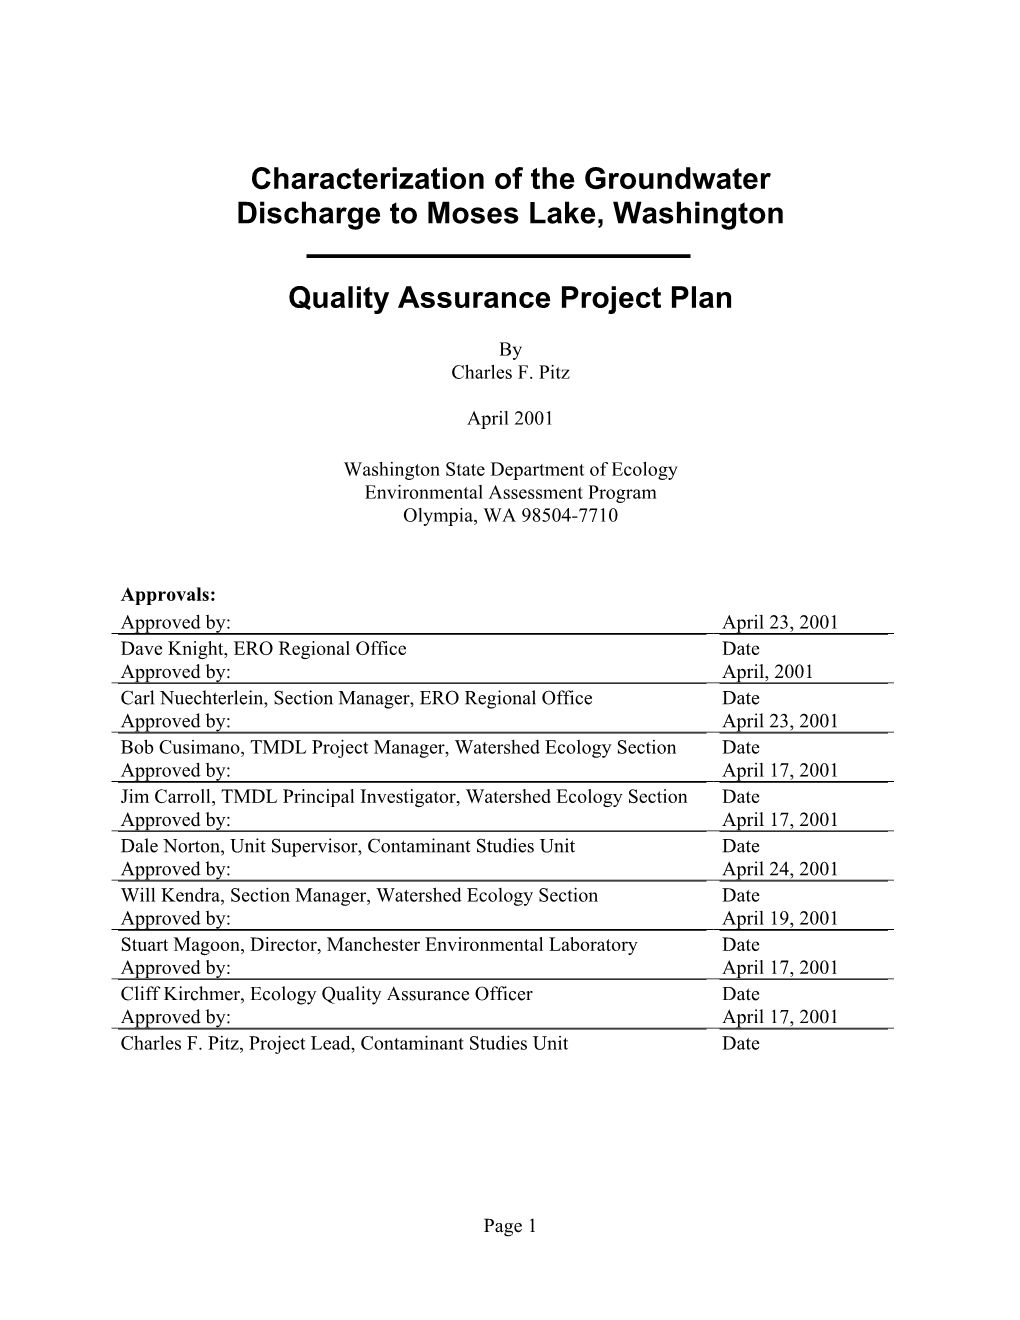 Characterization of the Groundwater Discharge to Moses Lake-QAPP